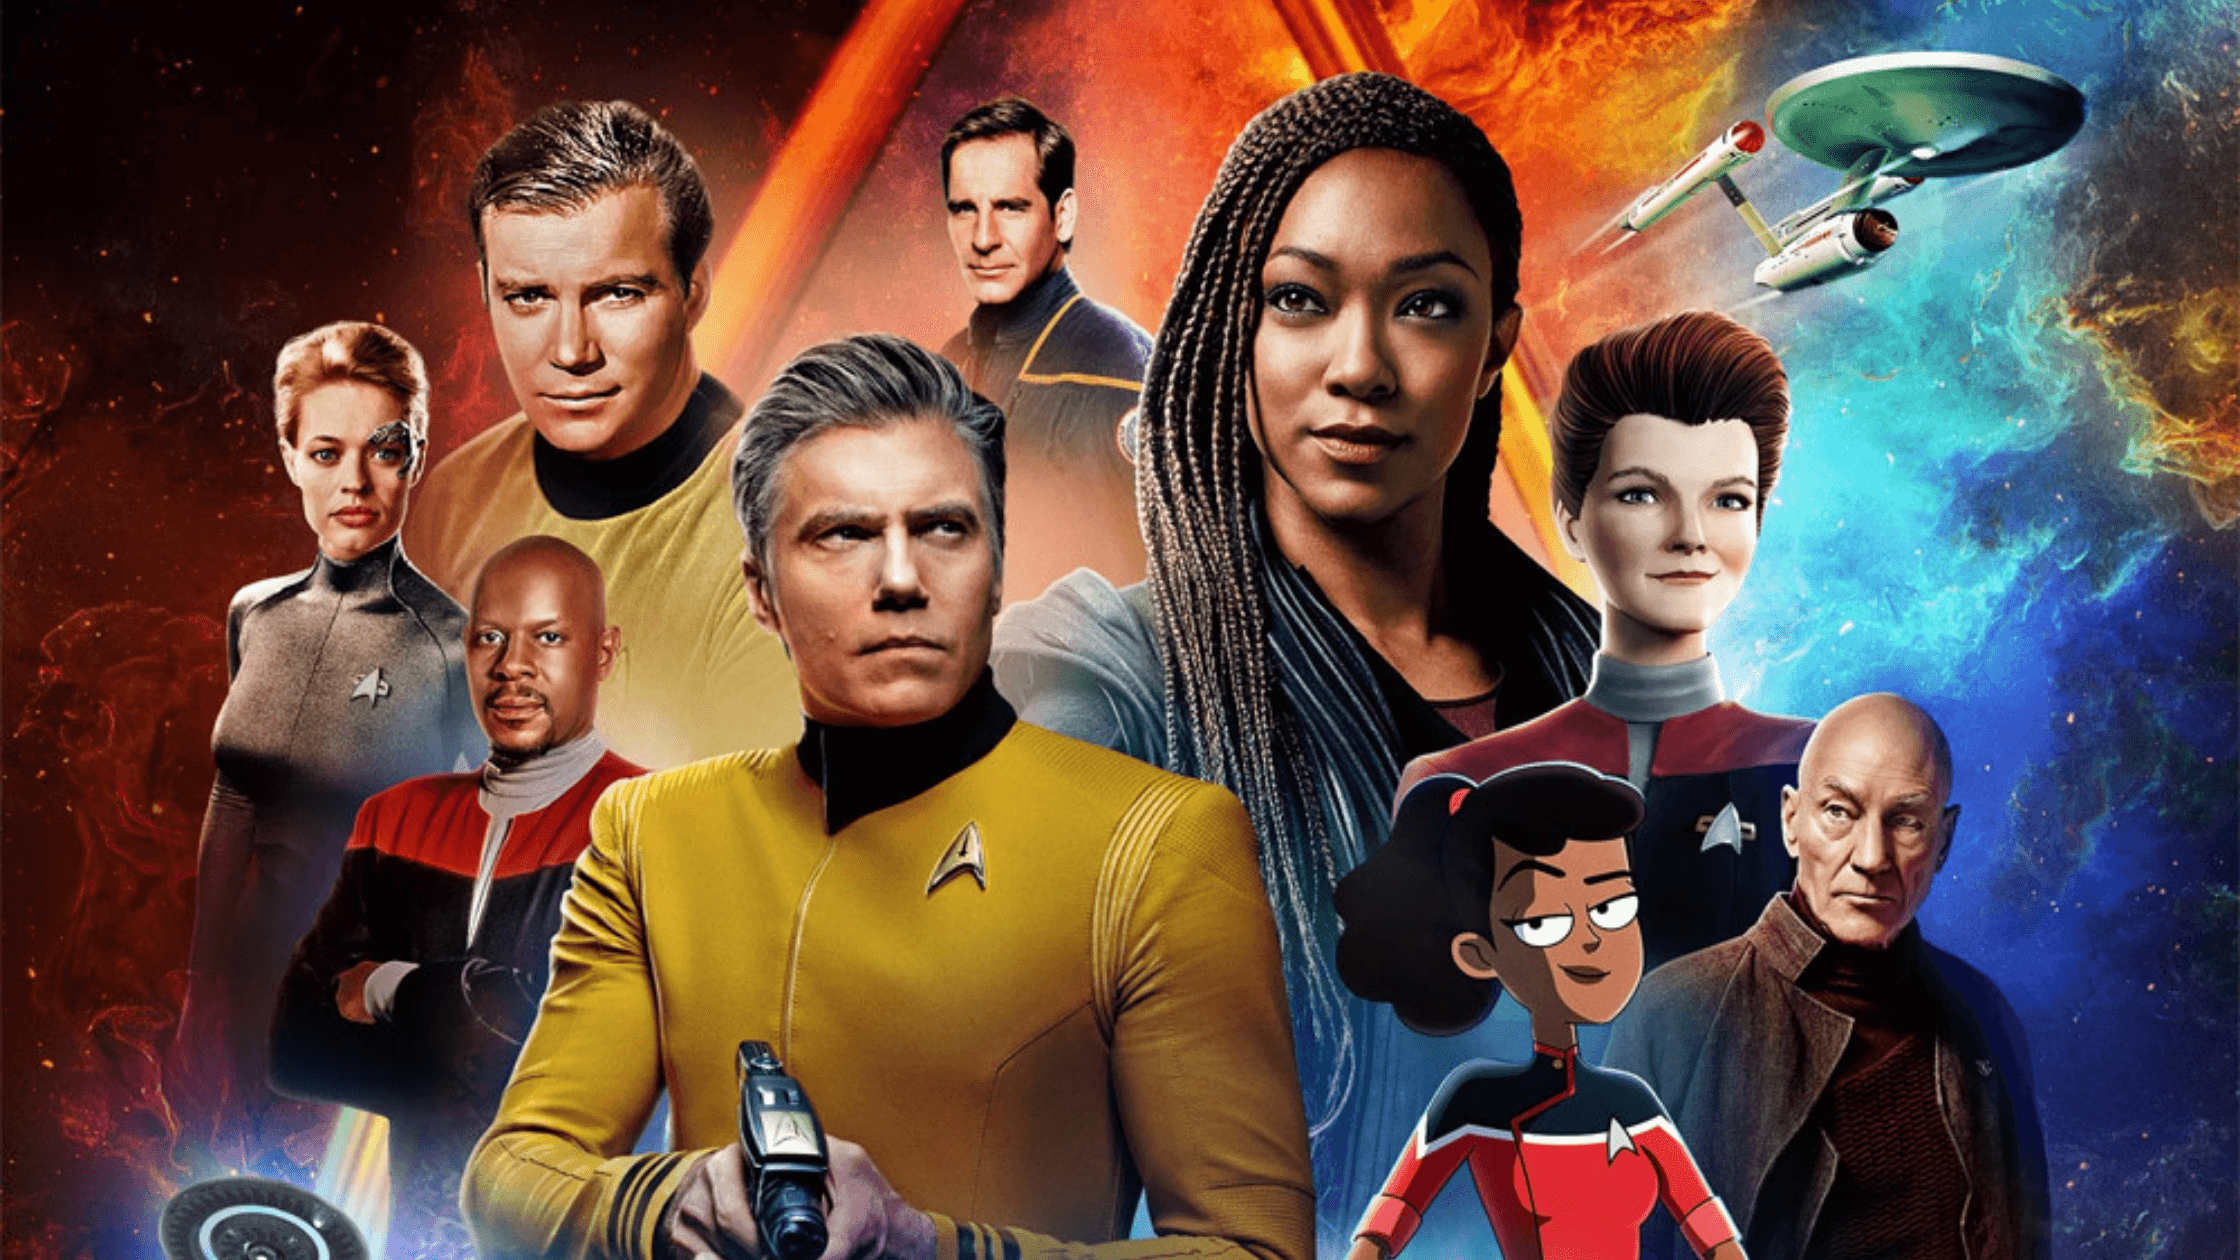 Star Trek Return Confirmed!!  Countdown begins the release date, cast, plot and the expected spoiler!